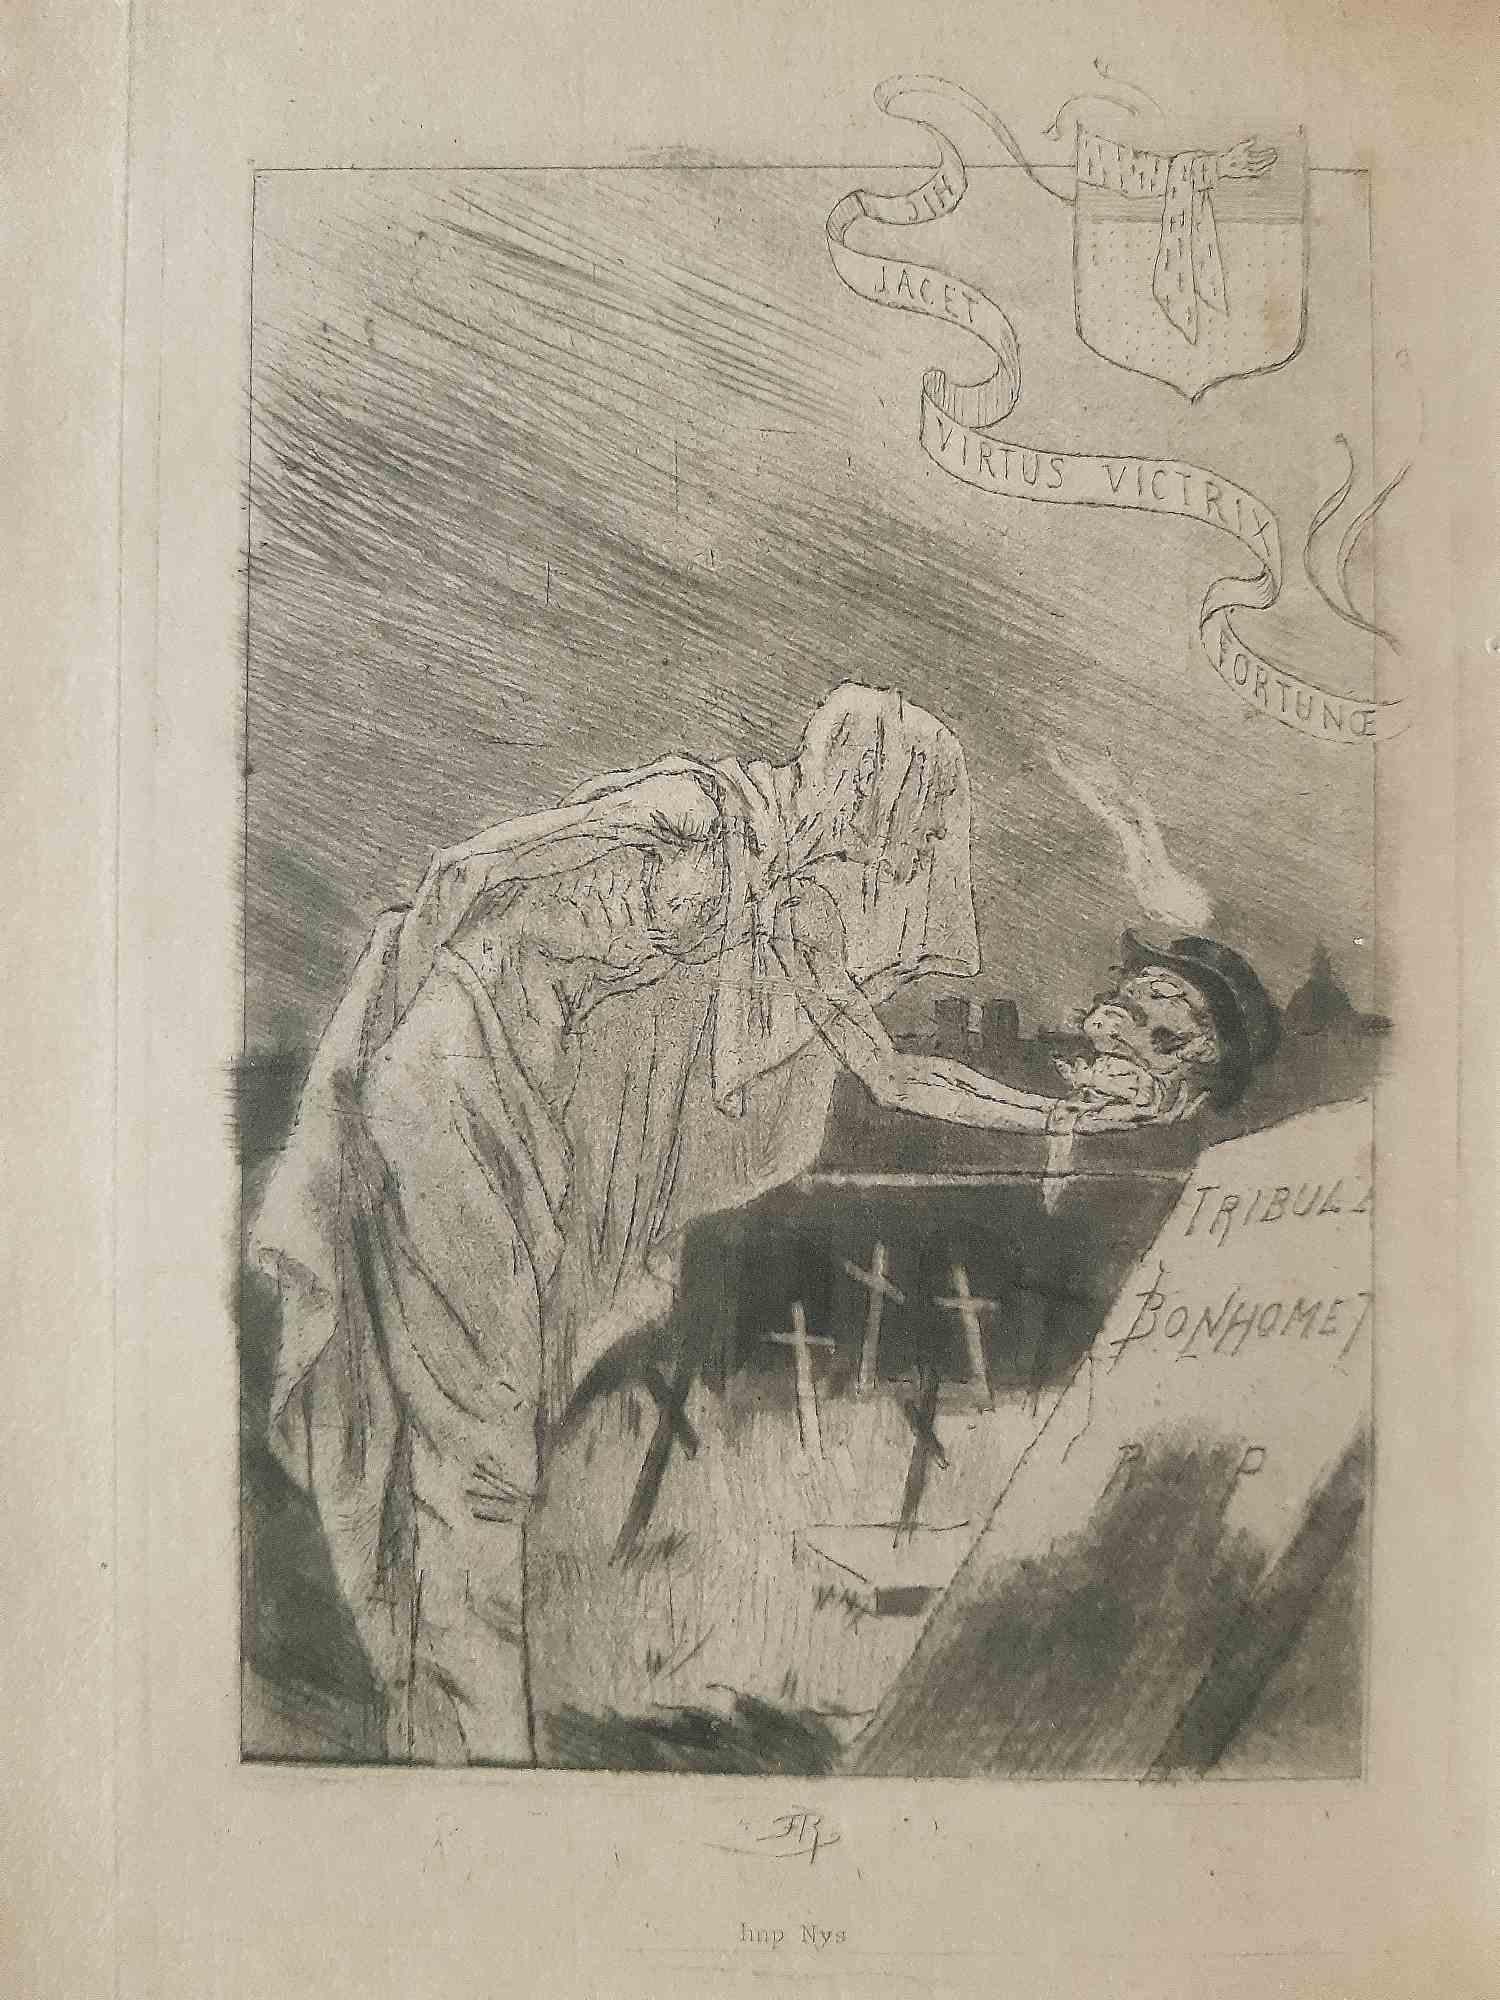 Chez les Passants - Rare Book Illustrated by Félicien Rops - 1890